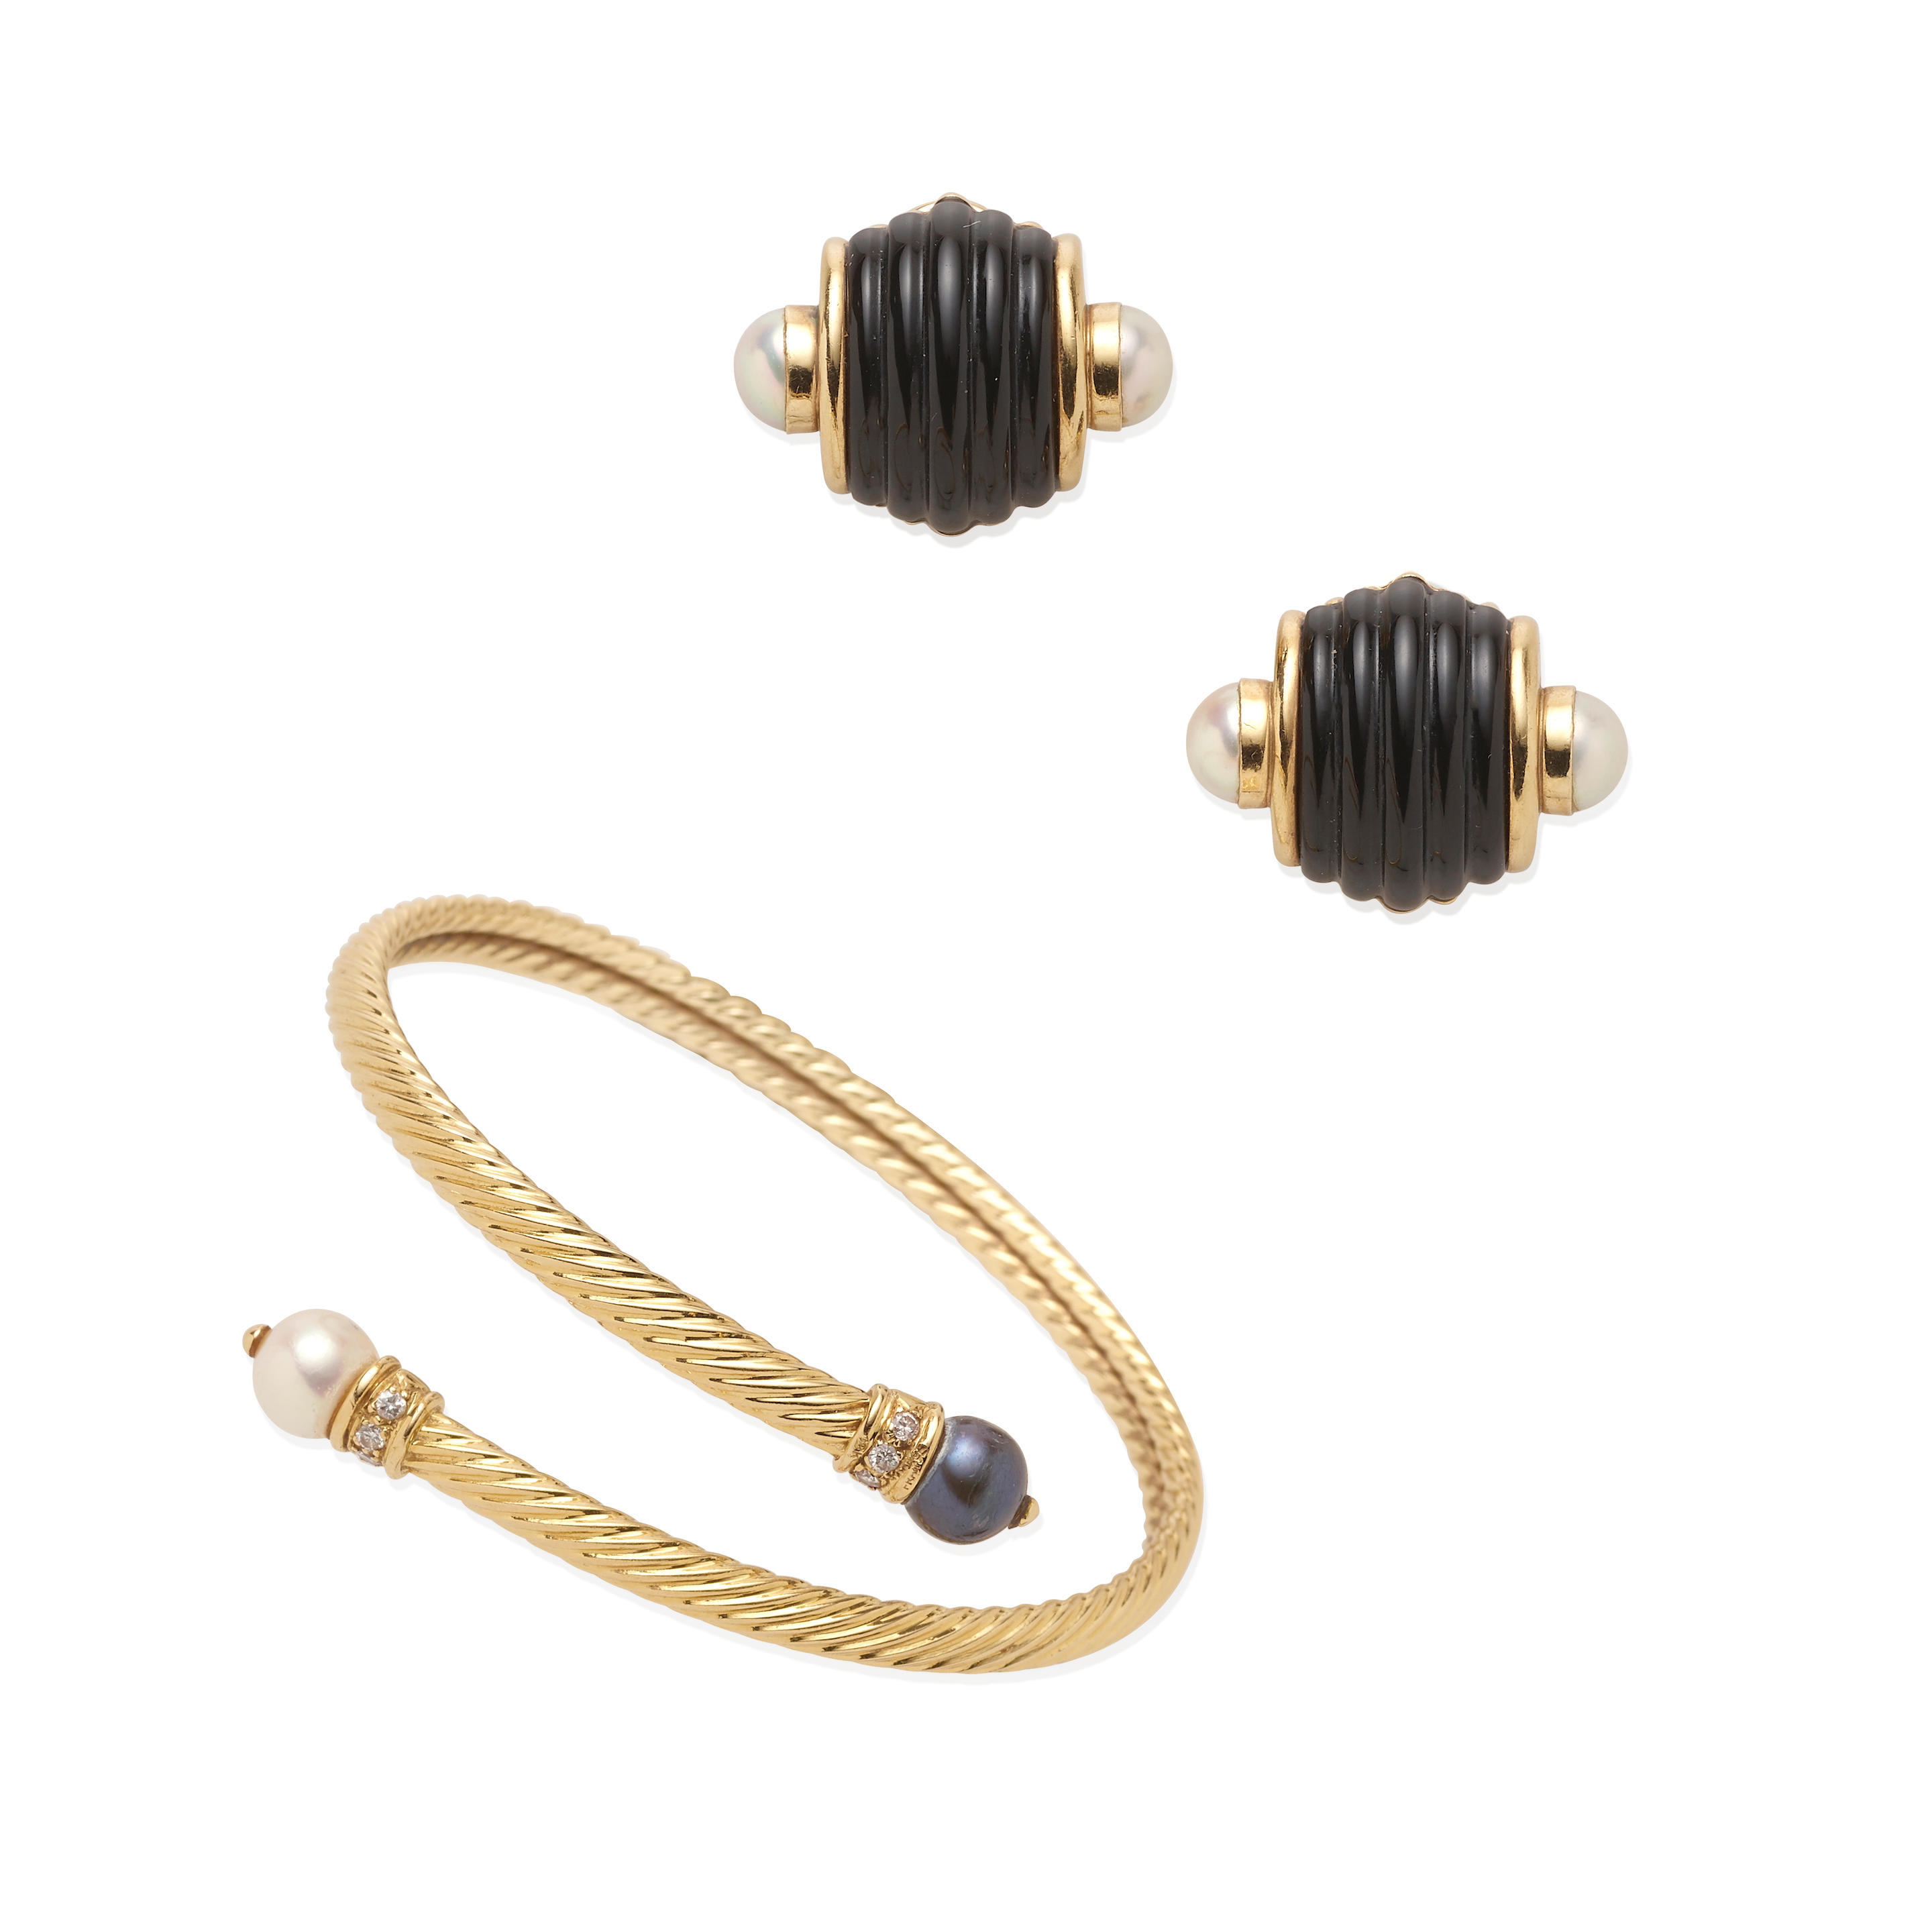 Trianon: Pair of Gold, Onyx and Cultured Pearl Ear Clips, Together With a...